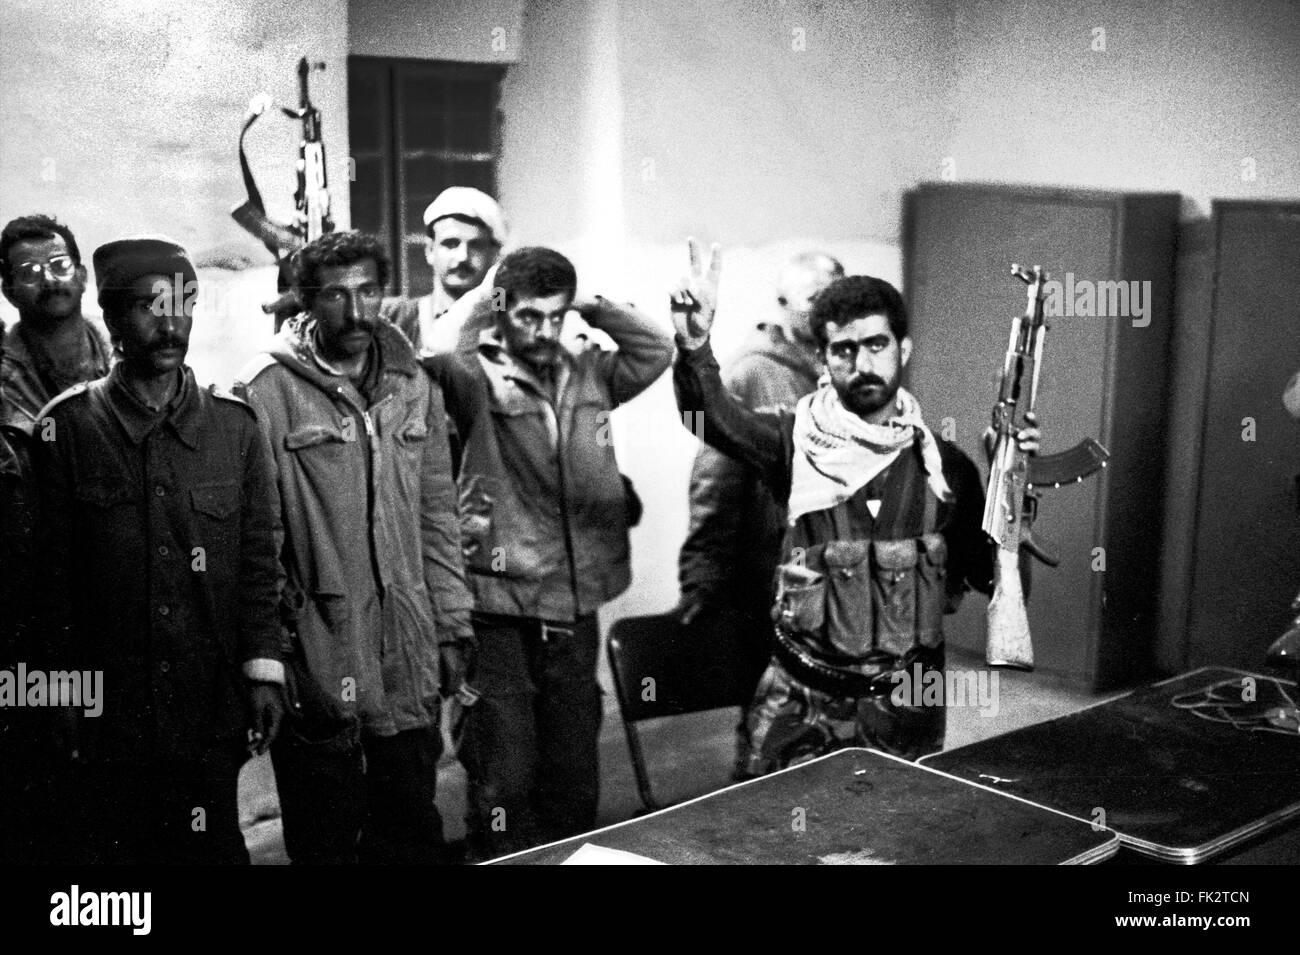 Zakho, northern Iraq, Kurdistan. March 1991. Fighters from the Kurdistan Front with captured prisoners of the Iraqi army at night, during the uprising by Kurds against forces of Saddam Hussein's government. Photo by:Richard Wayman Stock Photo